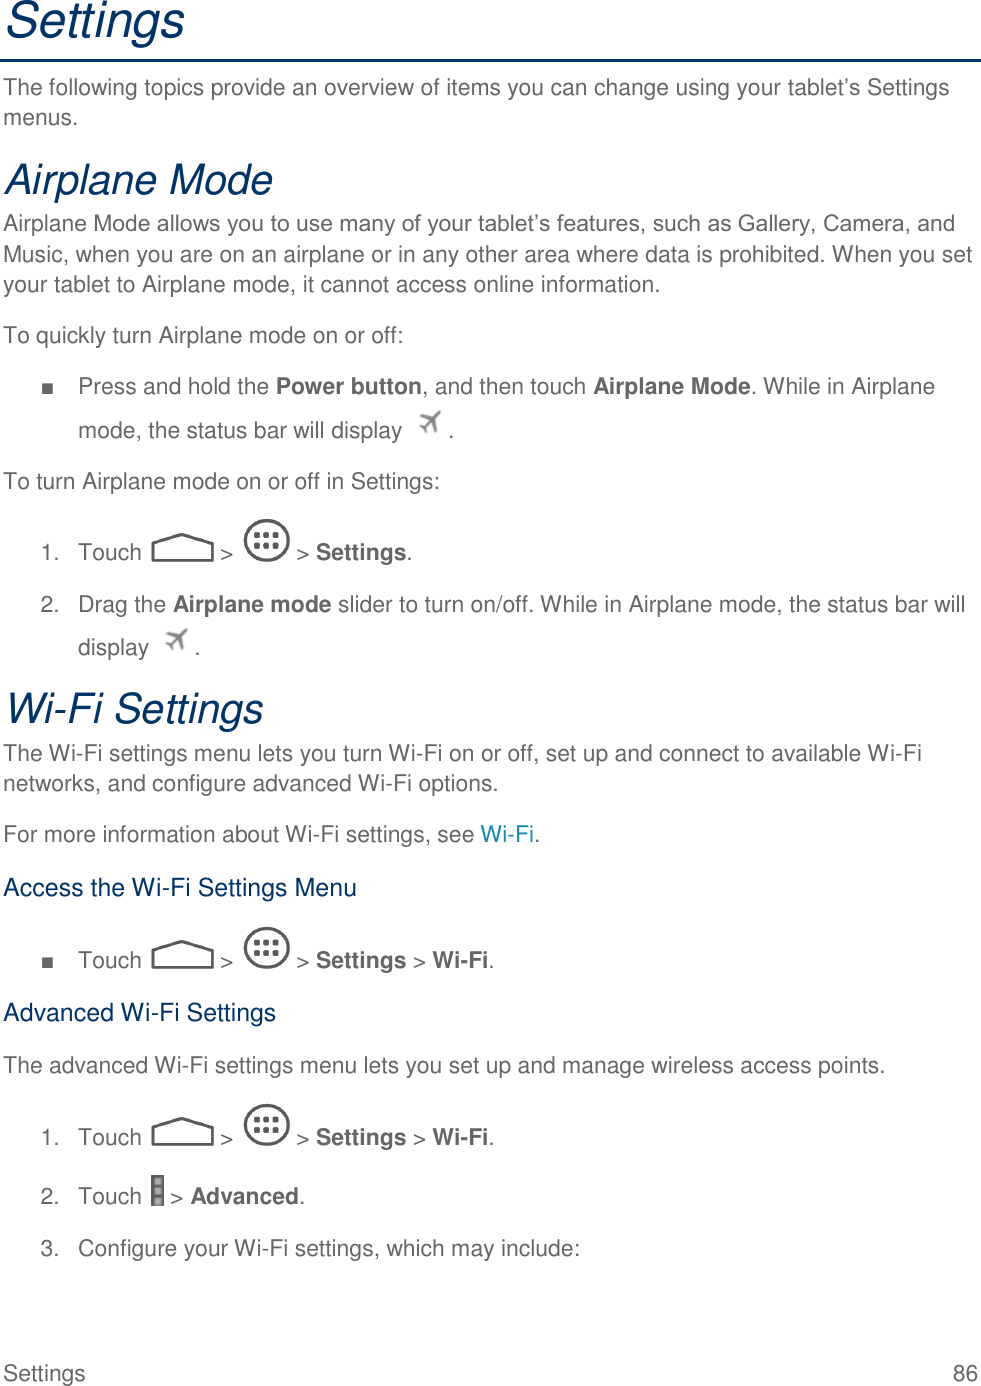  Settings  86 Settings The following topics provide an overview of items you can change using your tablet’s Settings menus. Airplane Mode Airplane Mode allows you to use many of your tablet’s features, such as Gallery, Camera, and Music, when you are on an airplane or in any other area where data is prohibited. When you set your tablet to Airplane mode, it cannot access online information. To quickly turn Airplane mode on or off: ■  Press and hold the Power button, and then touch Airplane Mode. While in Airplane mode, the status bar will display  . To turn Airplane mode on or off in Settings: 1.  Touch   &gt;   &gt; Settings. 2.  Drag the Airplane mode slider to turn on/off. While in Airplane mode, the status bar will display  . Wi-Fi Settings The Wi-Fi settings menu lets you turn Wi-Fi on or off, set up and connect to available Wi-Fi networks, and configure advanced Wi-Fi options. For more information about Wi-Fi settings, see Wi-Fi. Access the Wi-Fi Settings Menu ■  Touch   &gt;   &gt; Settings &gt; Wi-Fi. Advanced Wi-Fi Settings The advanced Wi-Fi settings menu lets you set up and manage wireless access points. 1.  Touch   &gt;   &gt; Settings &gt; Wi-Fi. 2.  Touch   &gt; Advanced. 3.  Configure your Wi-Fi settings, which may include: 